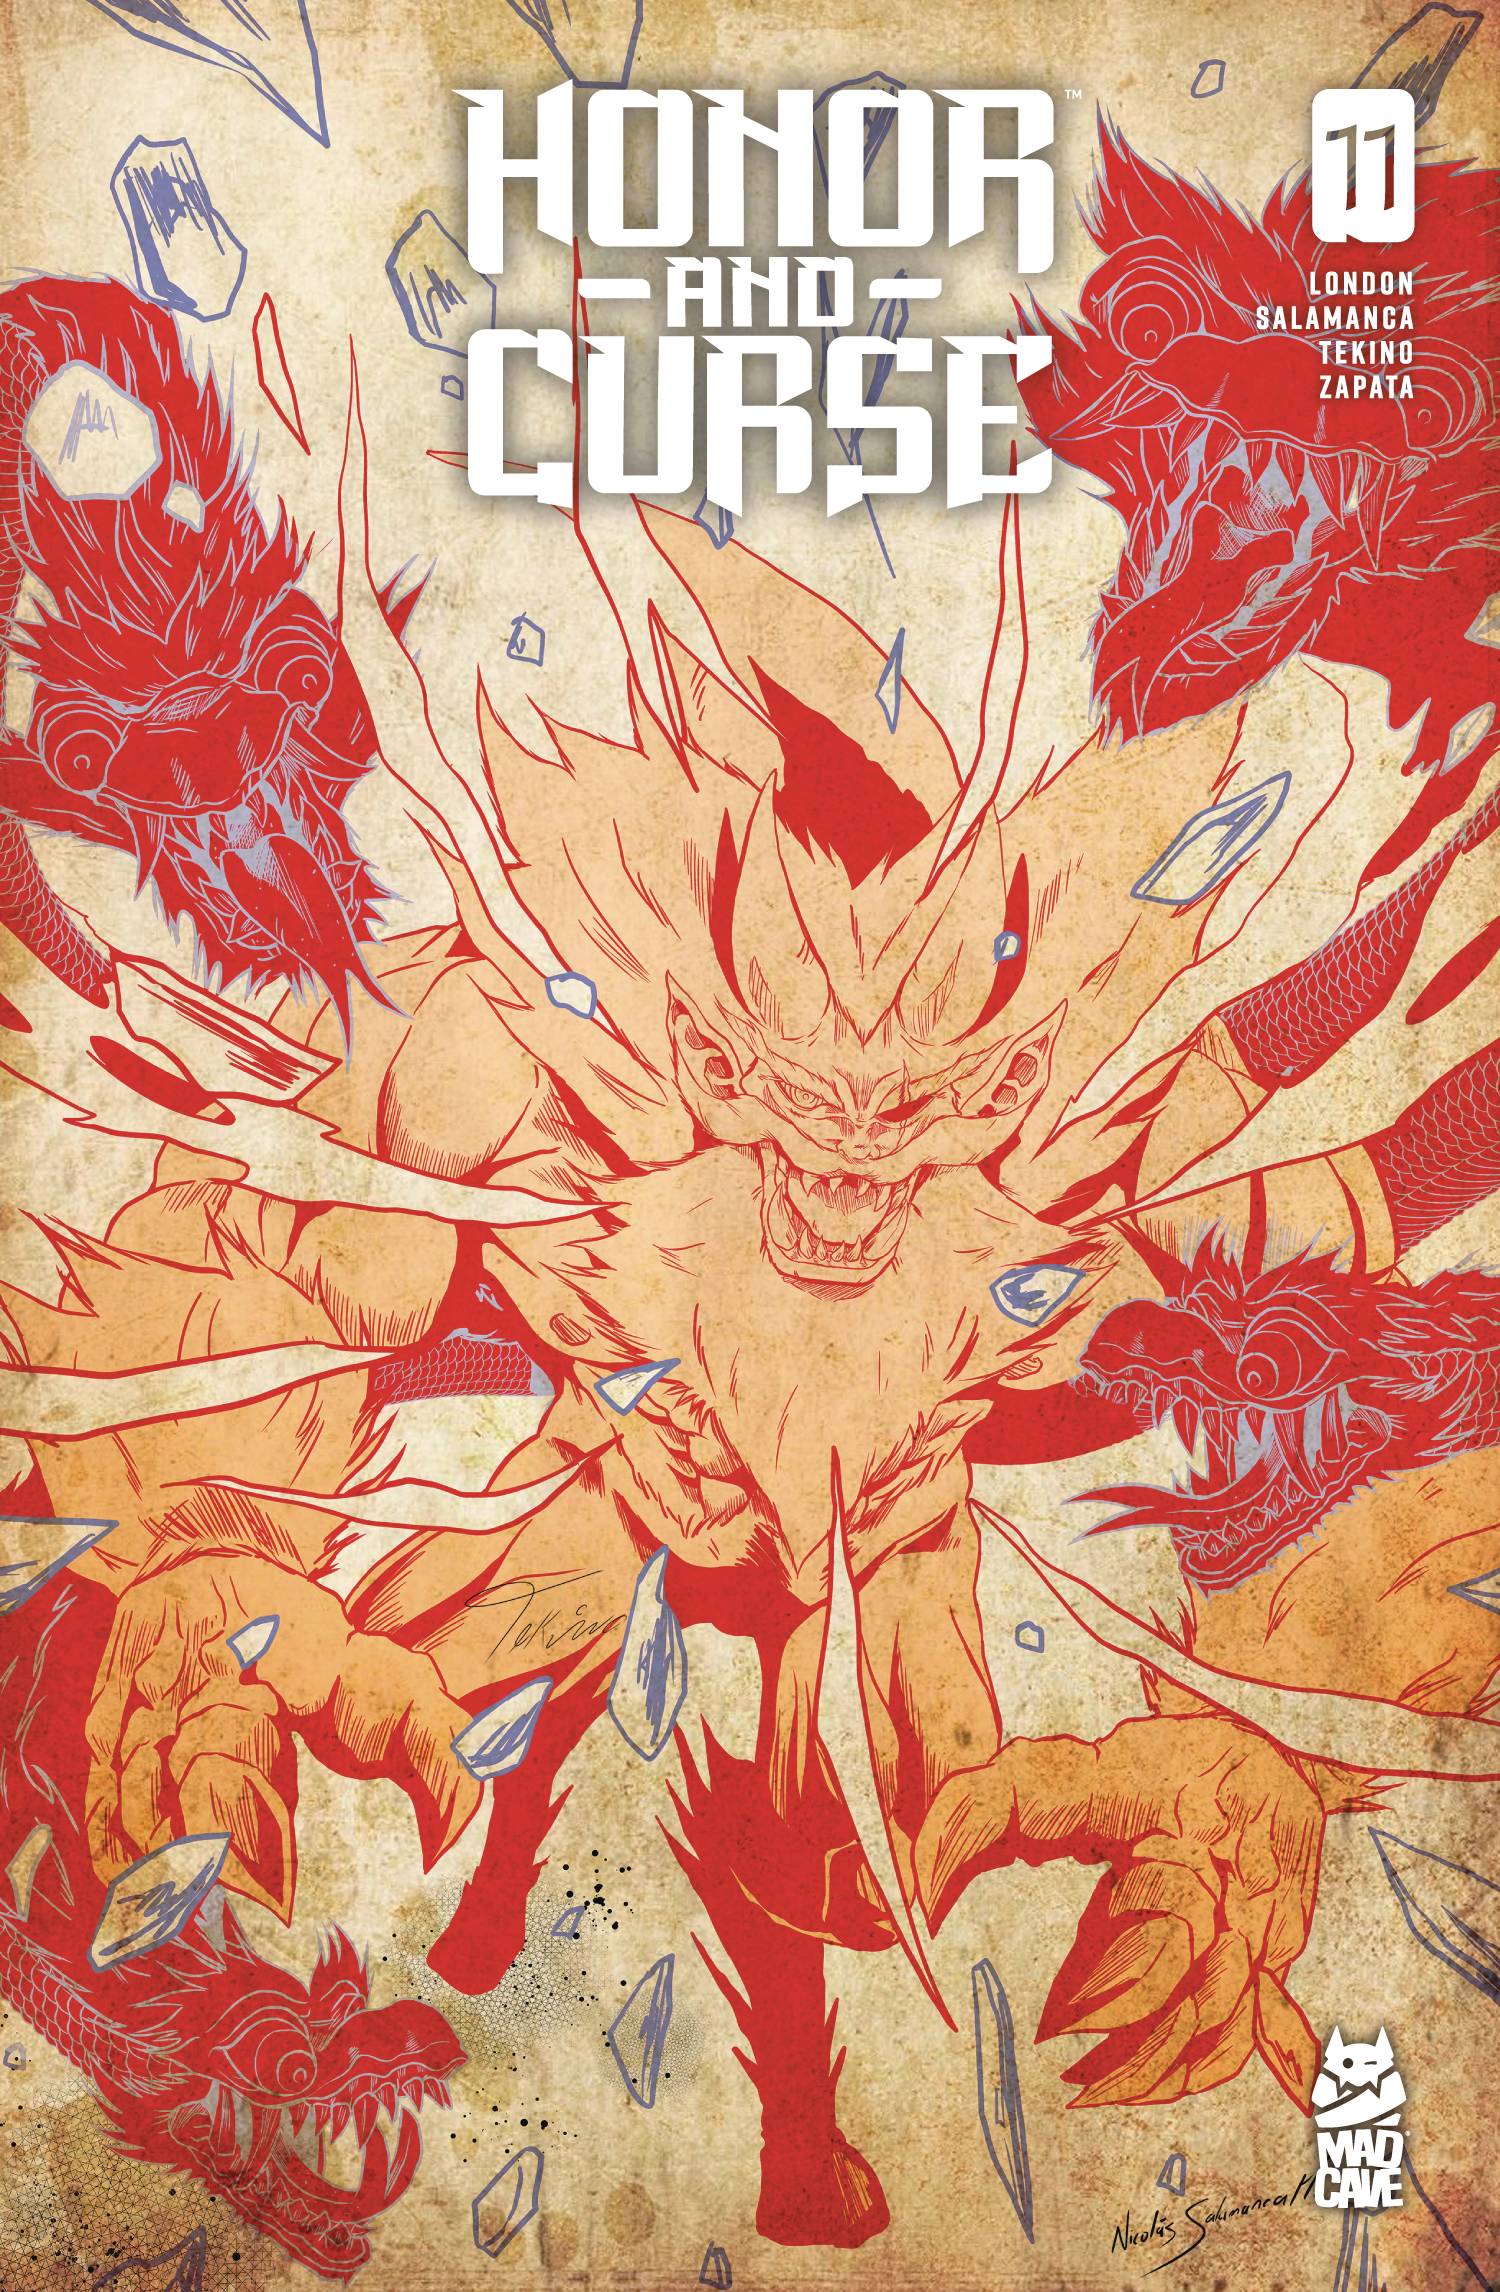 HONOR AND CURSE #11